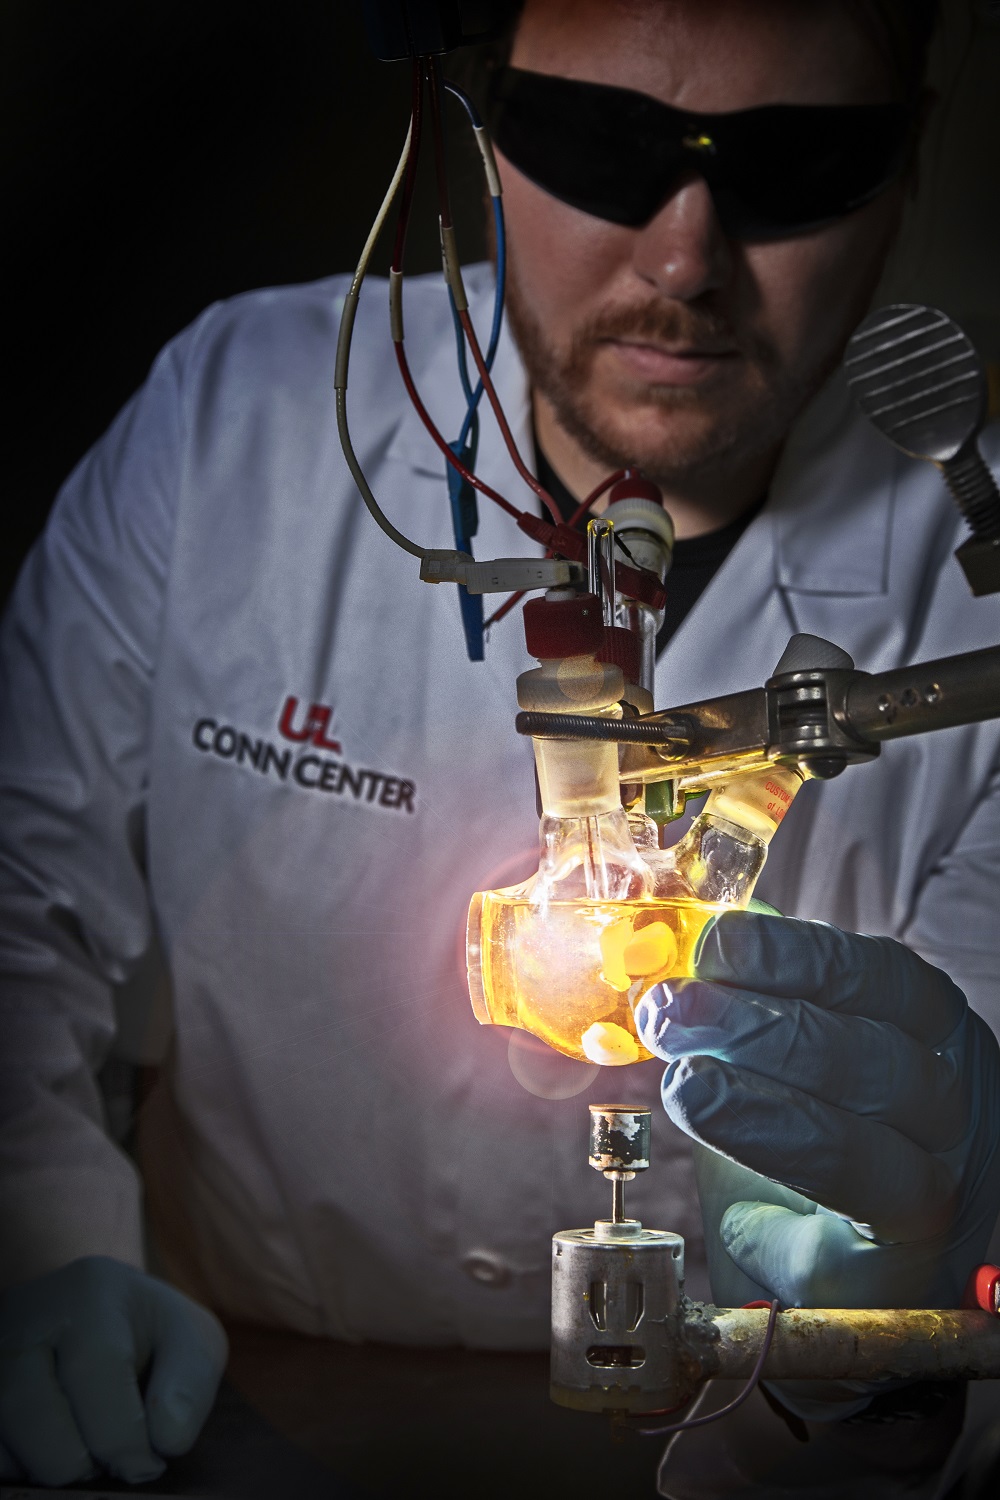 UofL chemistry graduate student Jacob Strain conducts a catalysis experiment at the Conn Center. UofL photo by Tom Fougerousse.